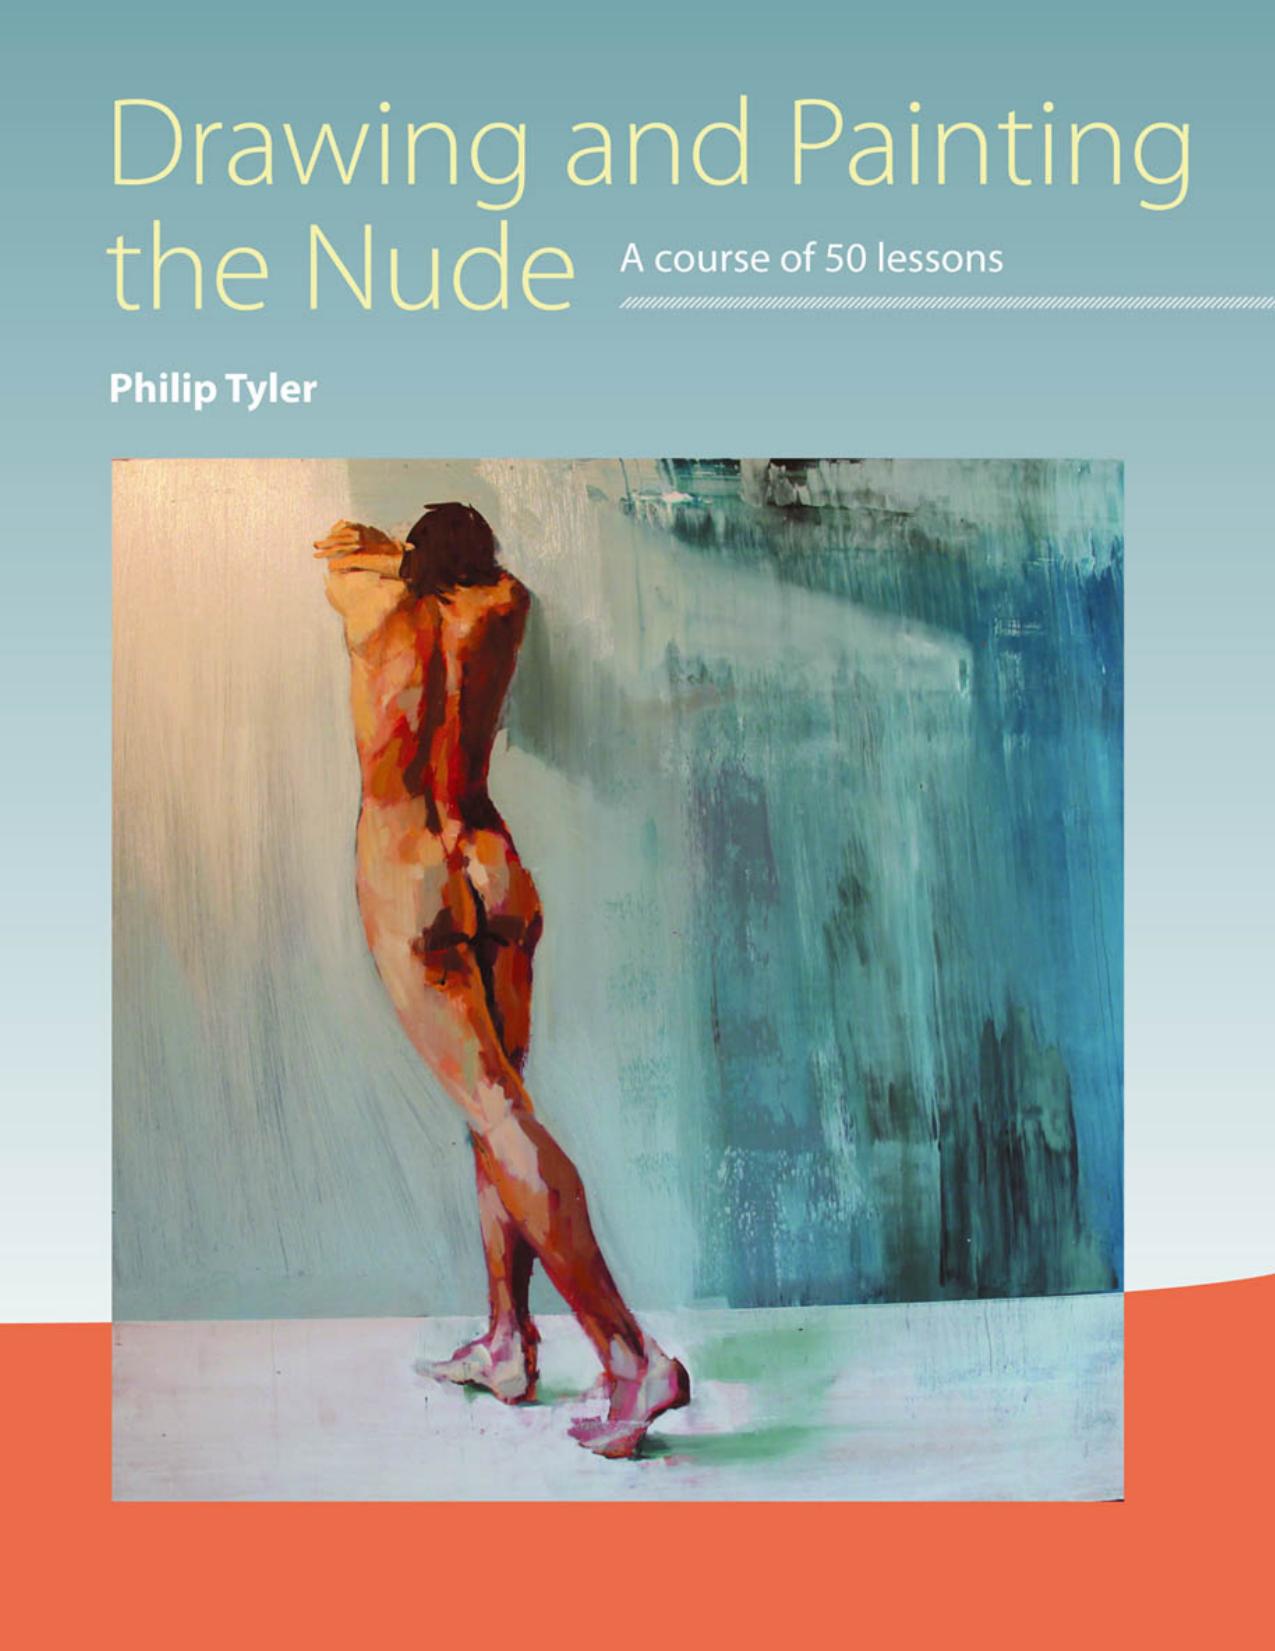 Drawing and Painting the Nude by Philip Tyler